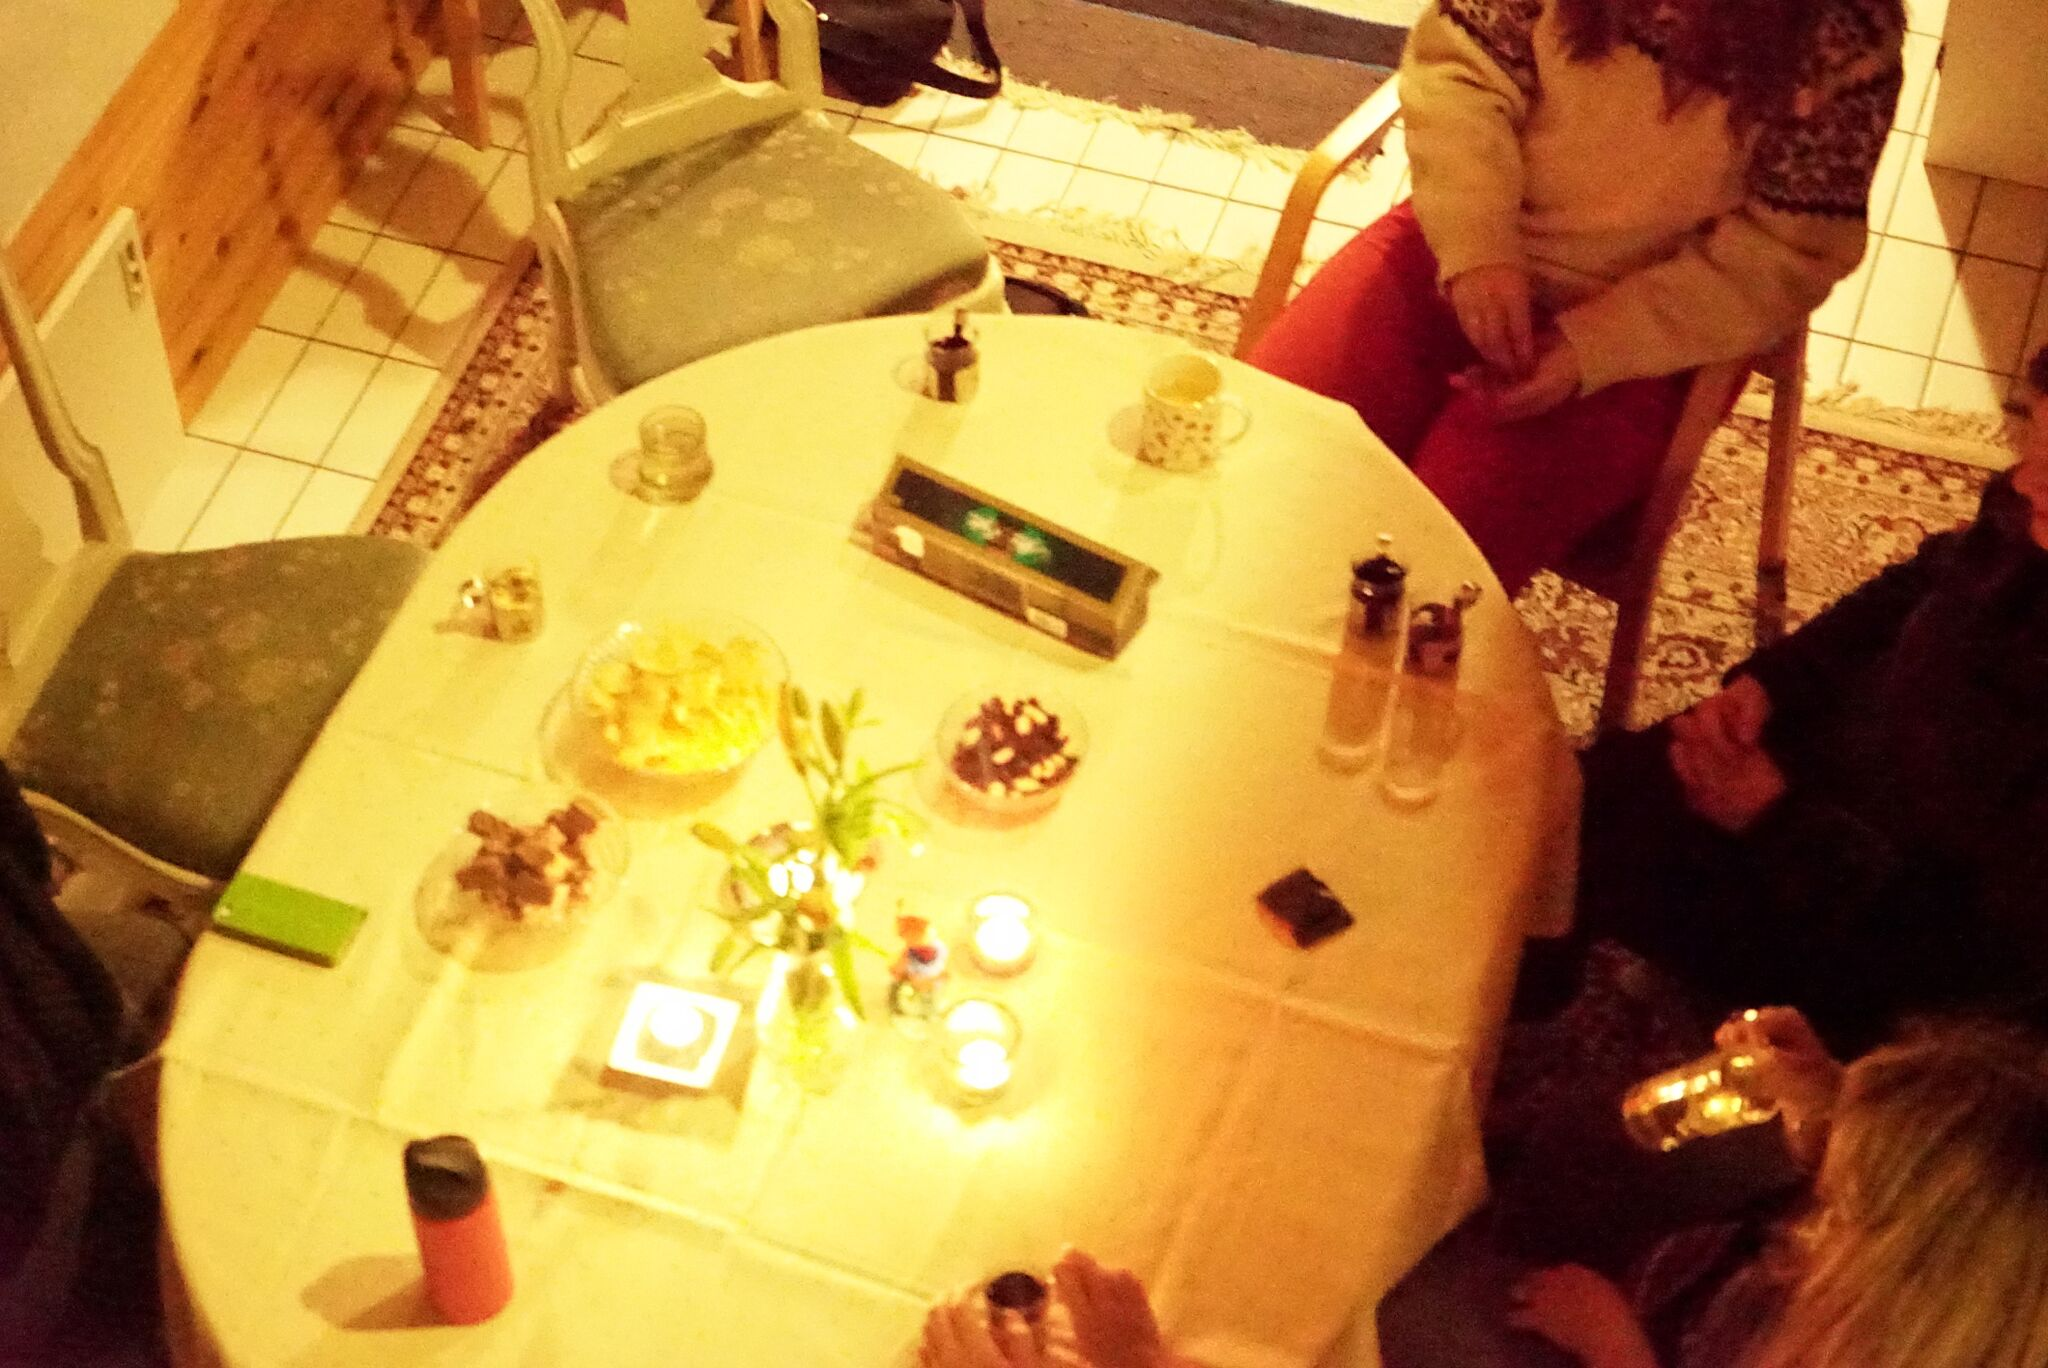 A dining table pictured from above with candles and three people sitting around